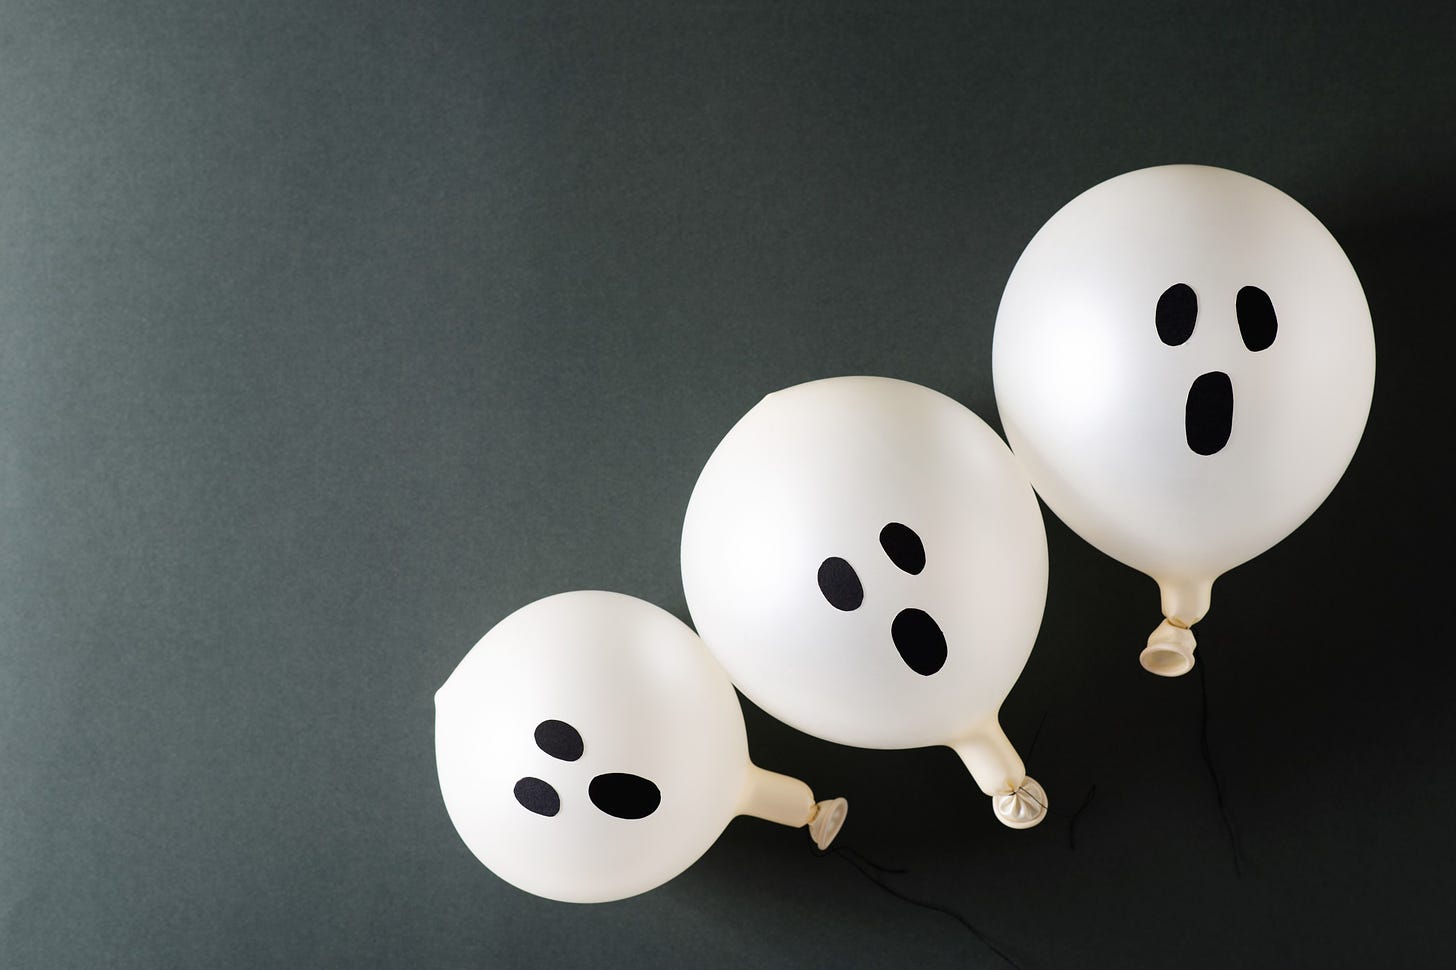 Three small ghost balloons sit clustered together from smallest to largest.